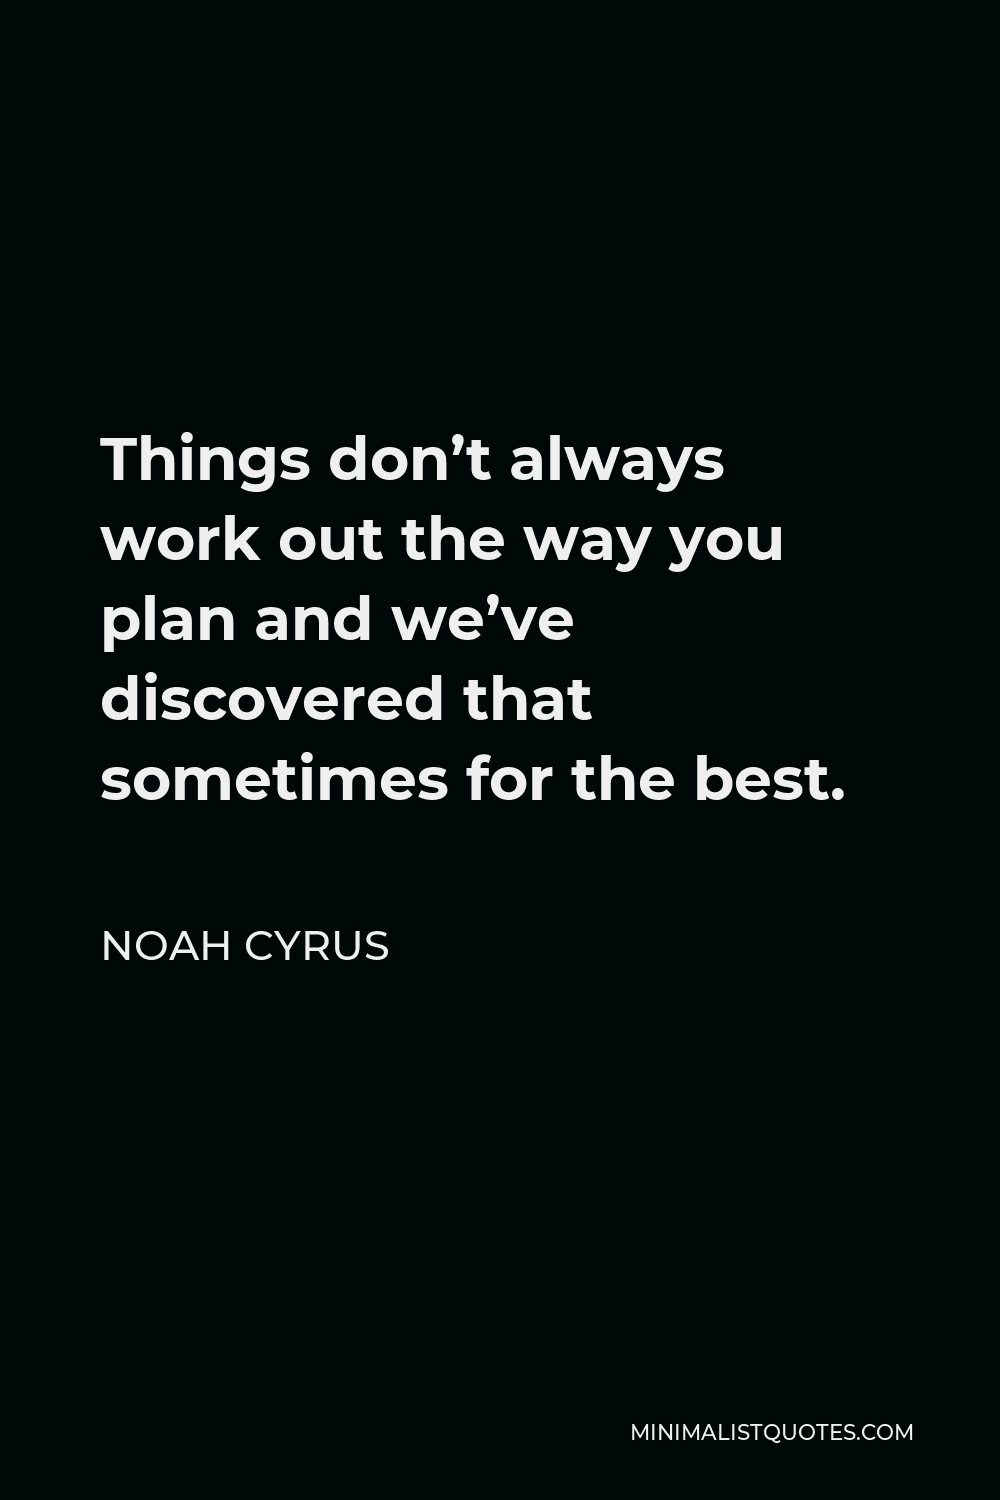 noah-cyrus-quote-things-don-t-always-work-out-the-way-you-plan-and-we-ve-discovered-that